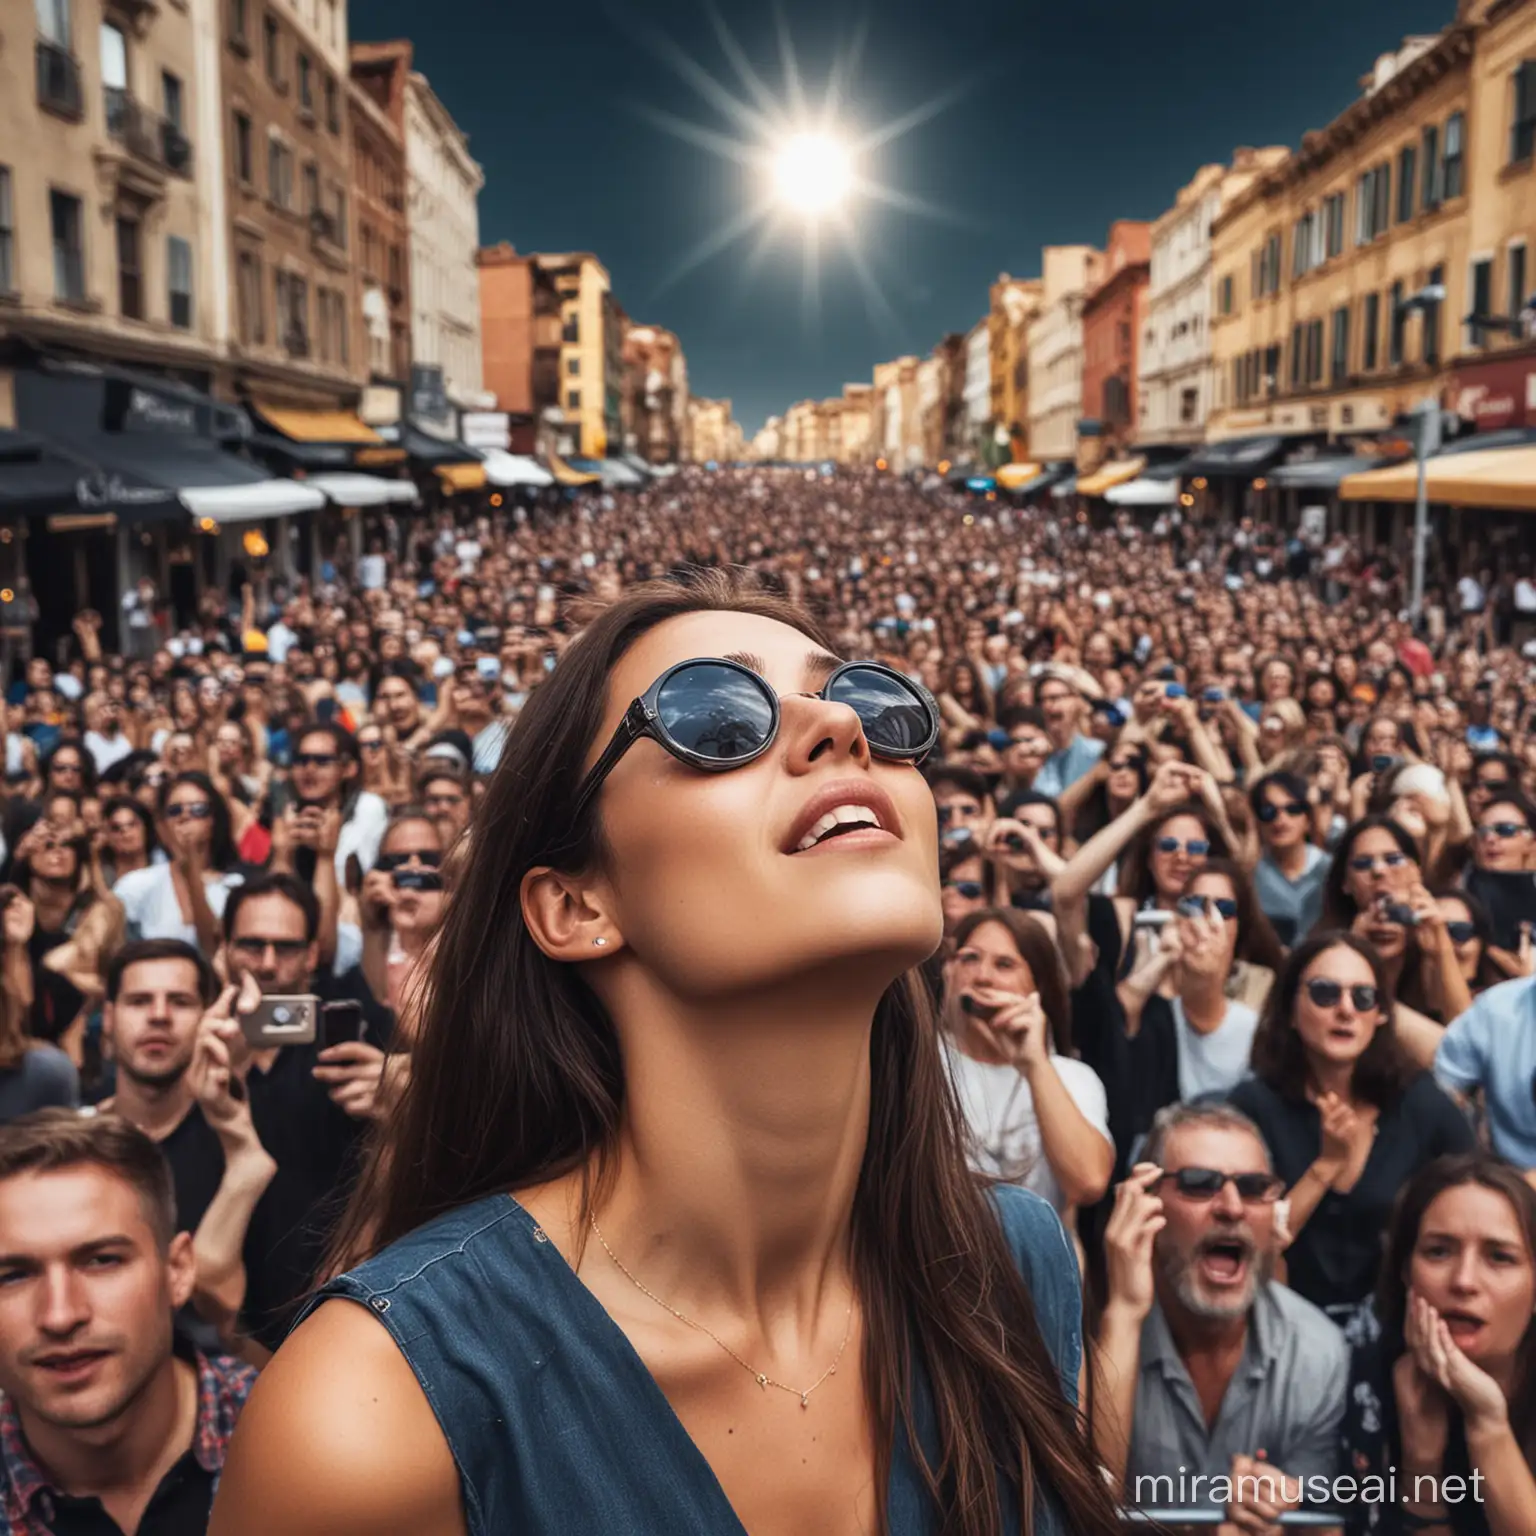 photo of a woman in a city watching with the crowd a total solar eclipse